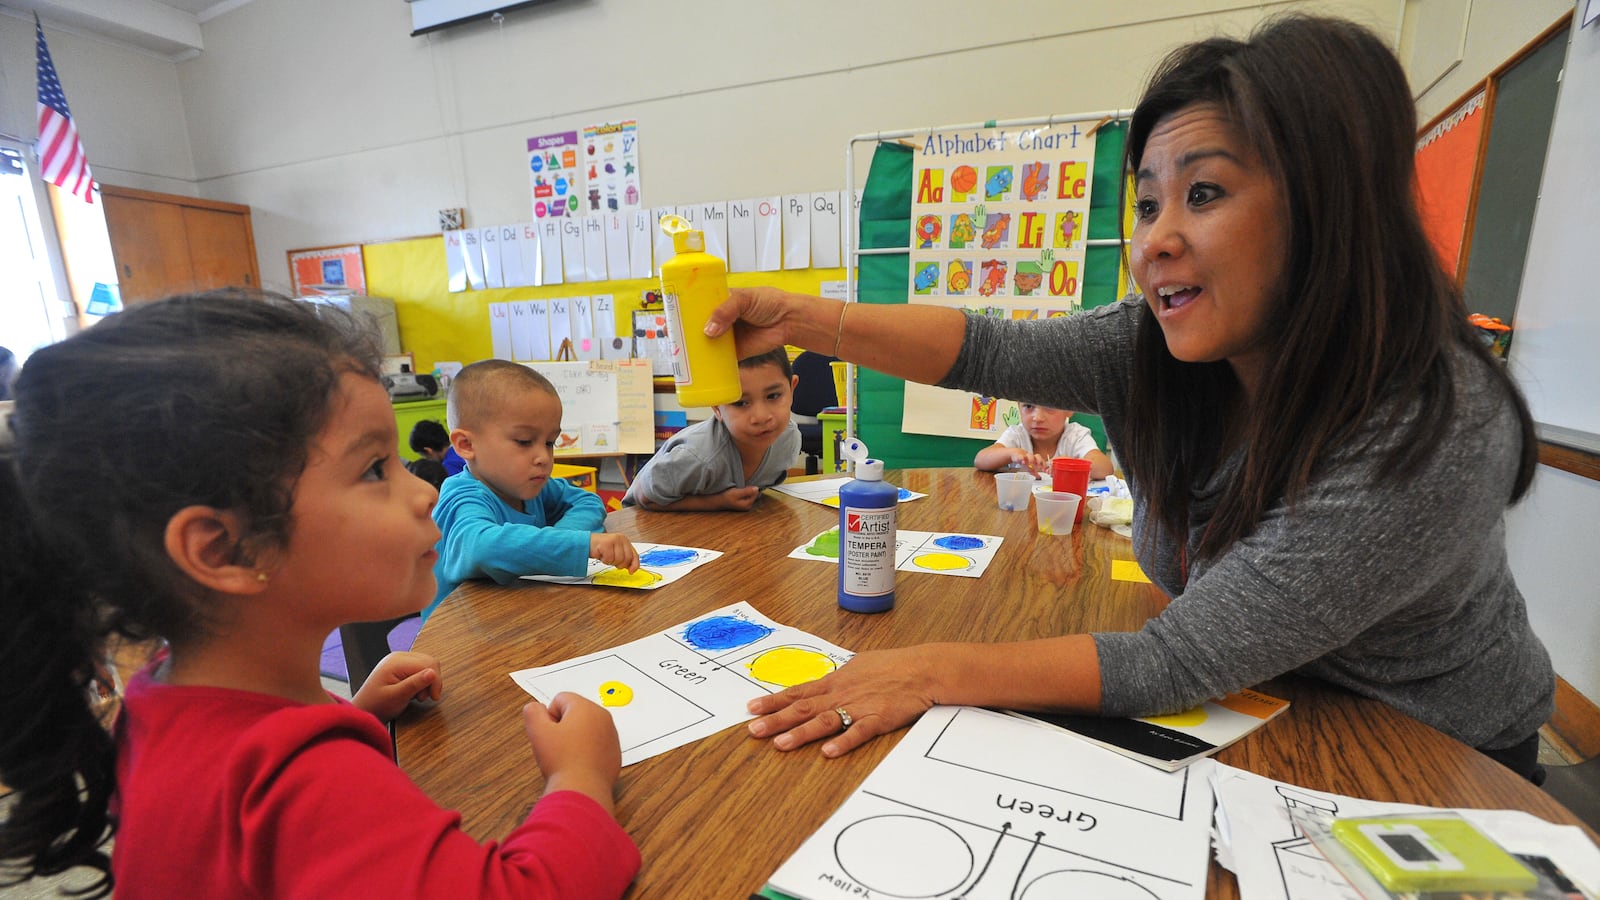 Pre-school teacher Aimee Iwasaki works with her mild to moderately disabled students including Aimee Hernandez, left, on a painting and colors exercise at Buffum Total Learning Center in Long Beach, CA on Wednesday, October 9, 2013. (Photo by Scott Varley/Digital First Media/Torrance Daily Breeze via Getty Images)